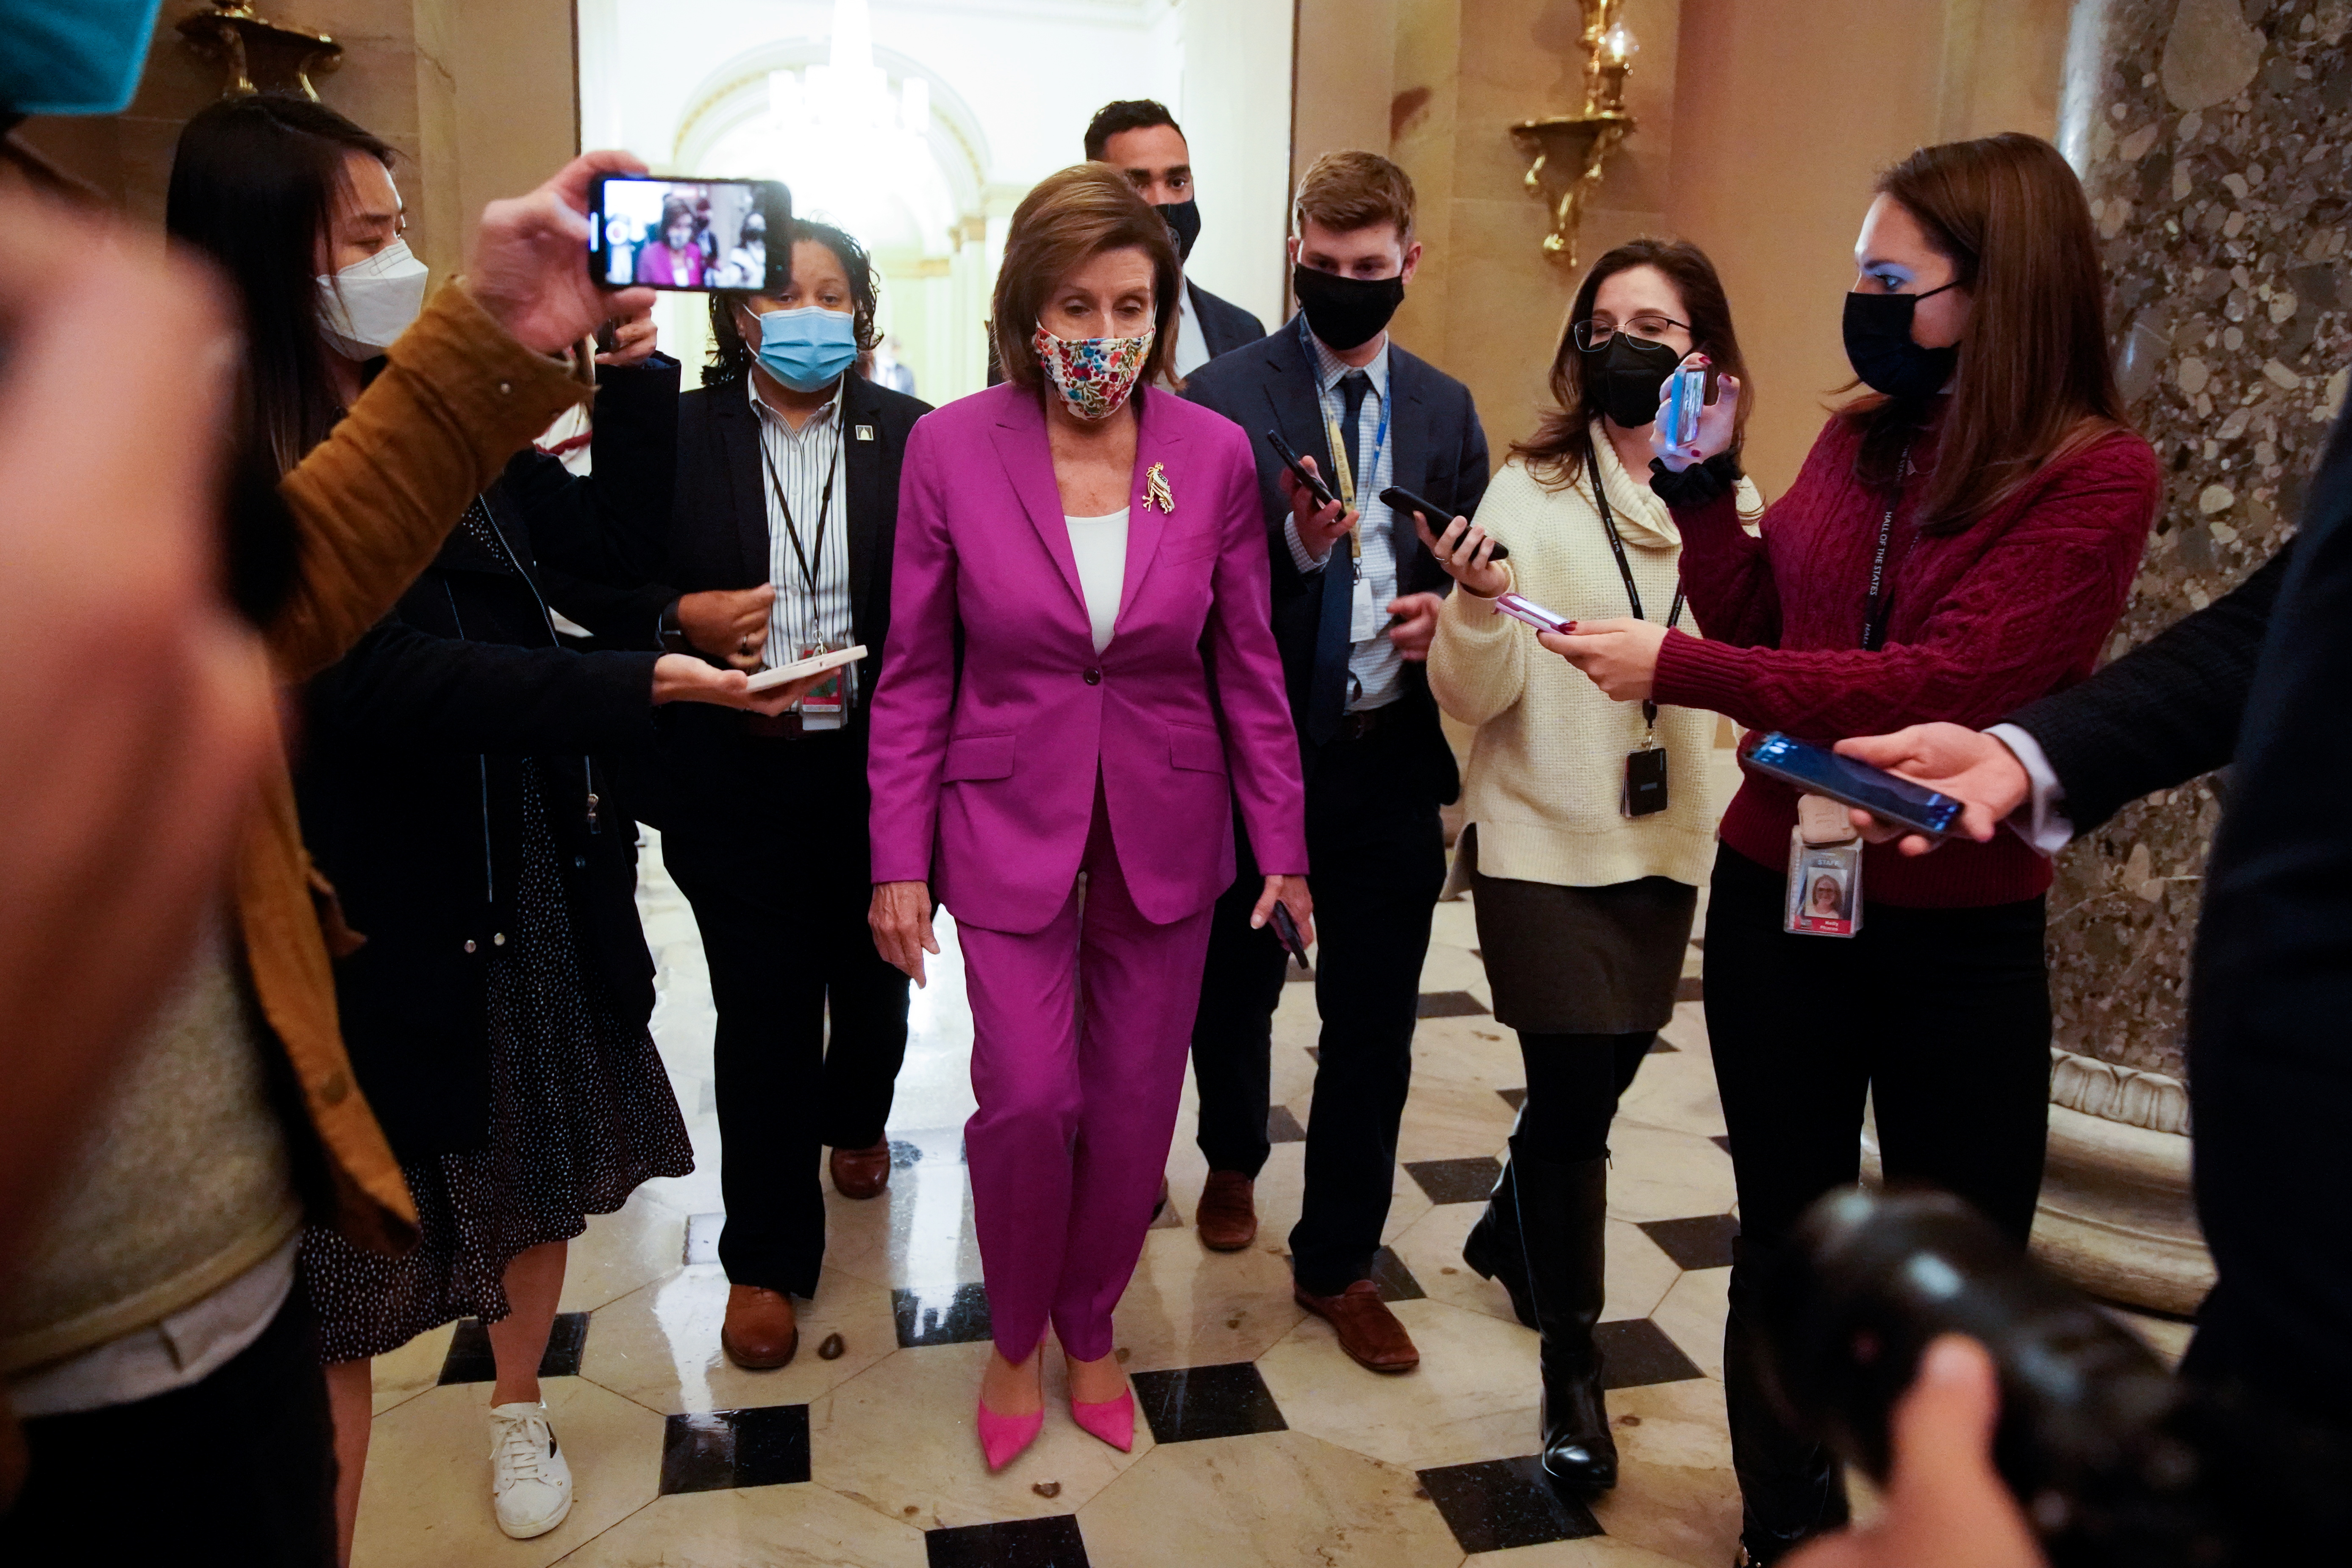 House Speaker Nancy Pelosi (D-CA) is pursued by reporters after the House passed the bipartisan infrastructure package at the U.S. Capitol in Washington, U.S., November 6, 2021. REUTERS/Elizabeth Frantz